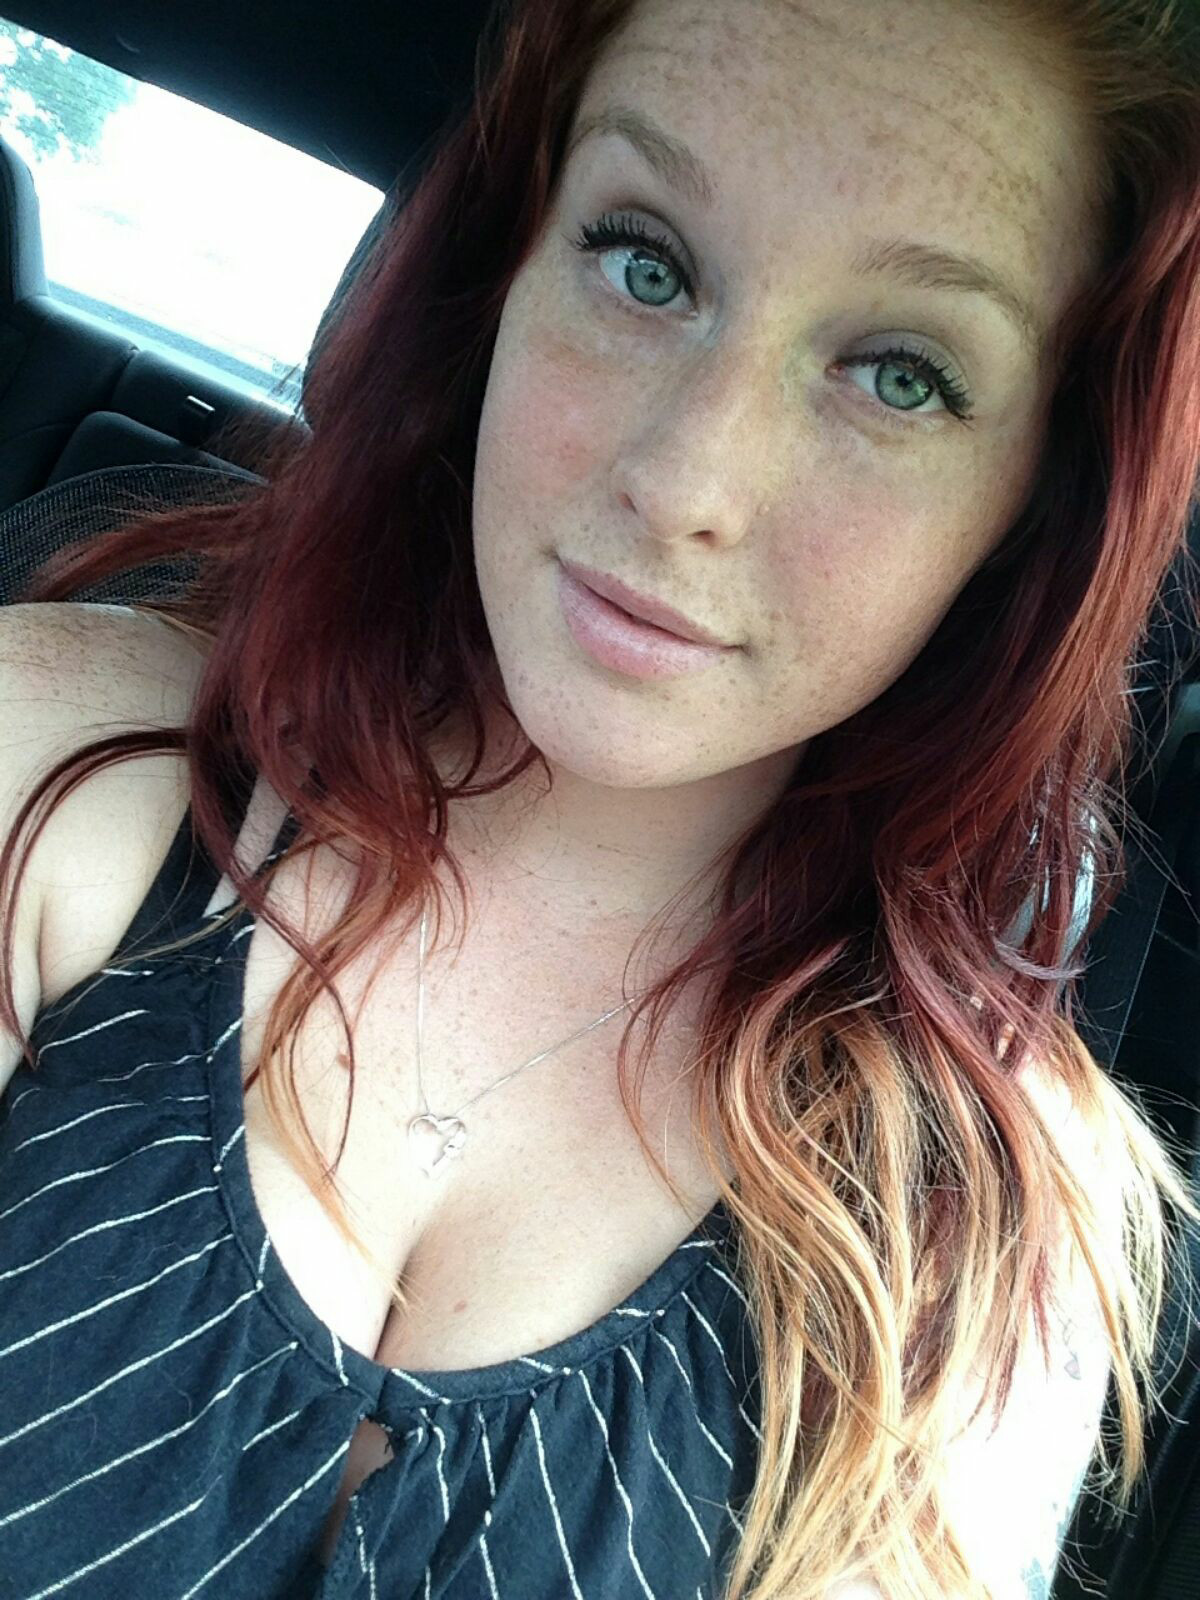 Freckled Busty Porn - Busty Freckled Redhead Ex Marine (50 pictures) - Shooshtime